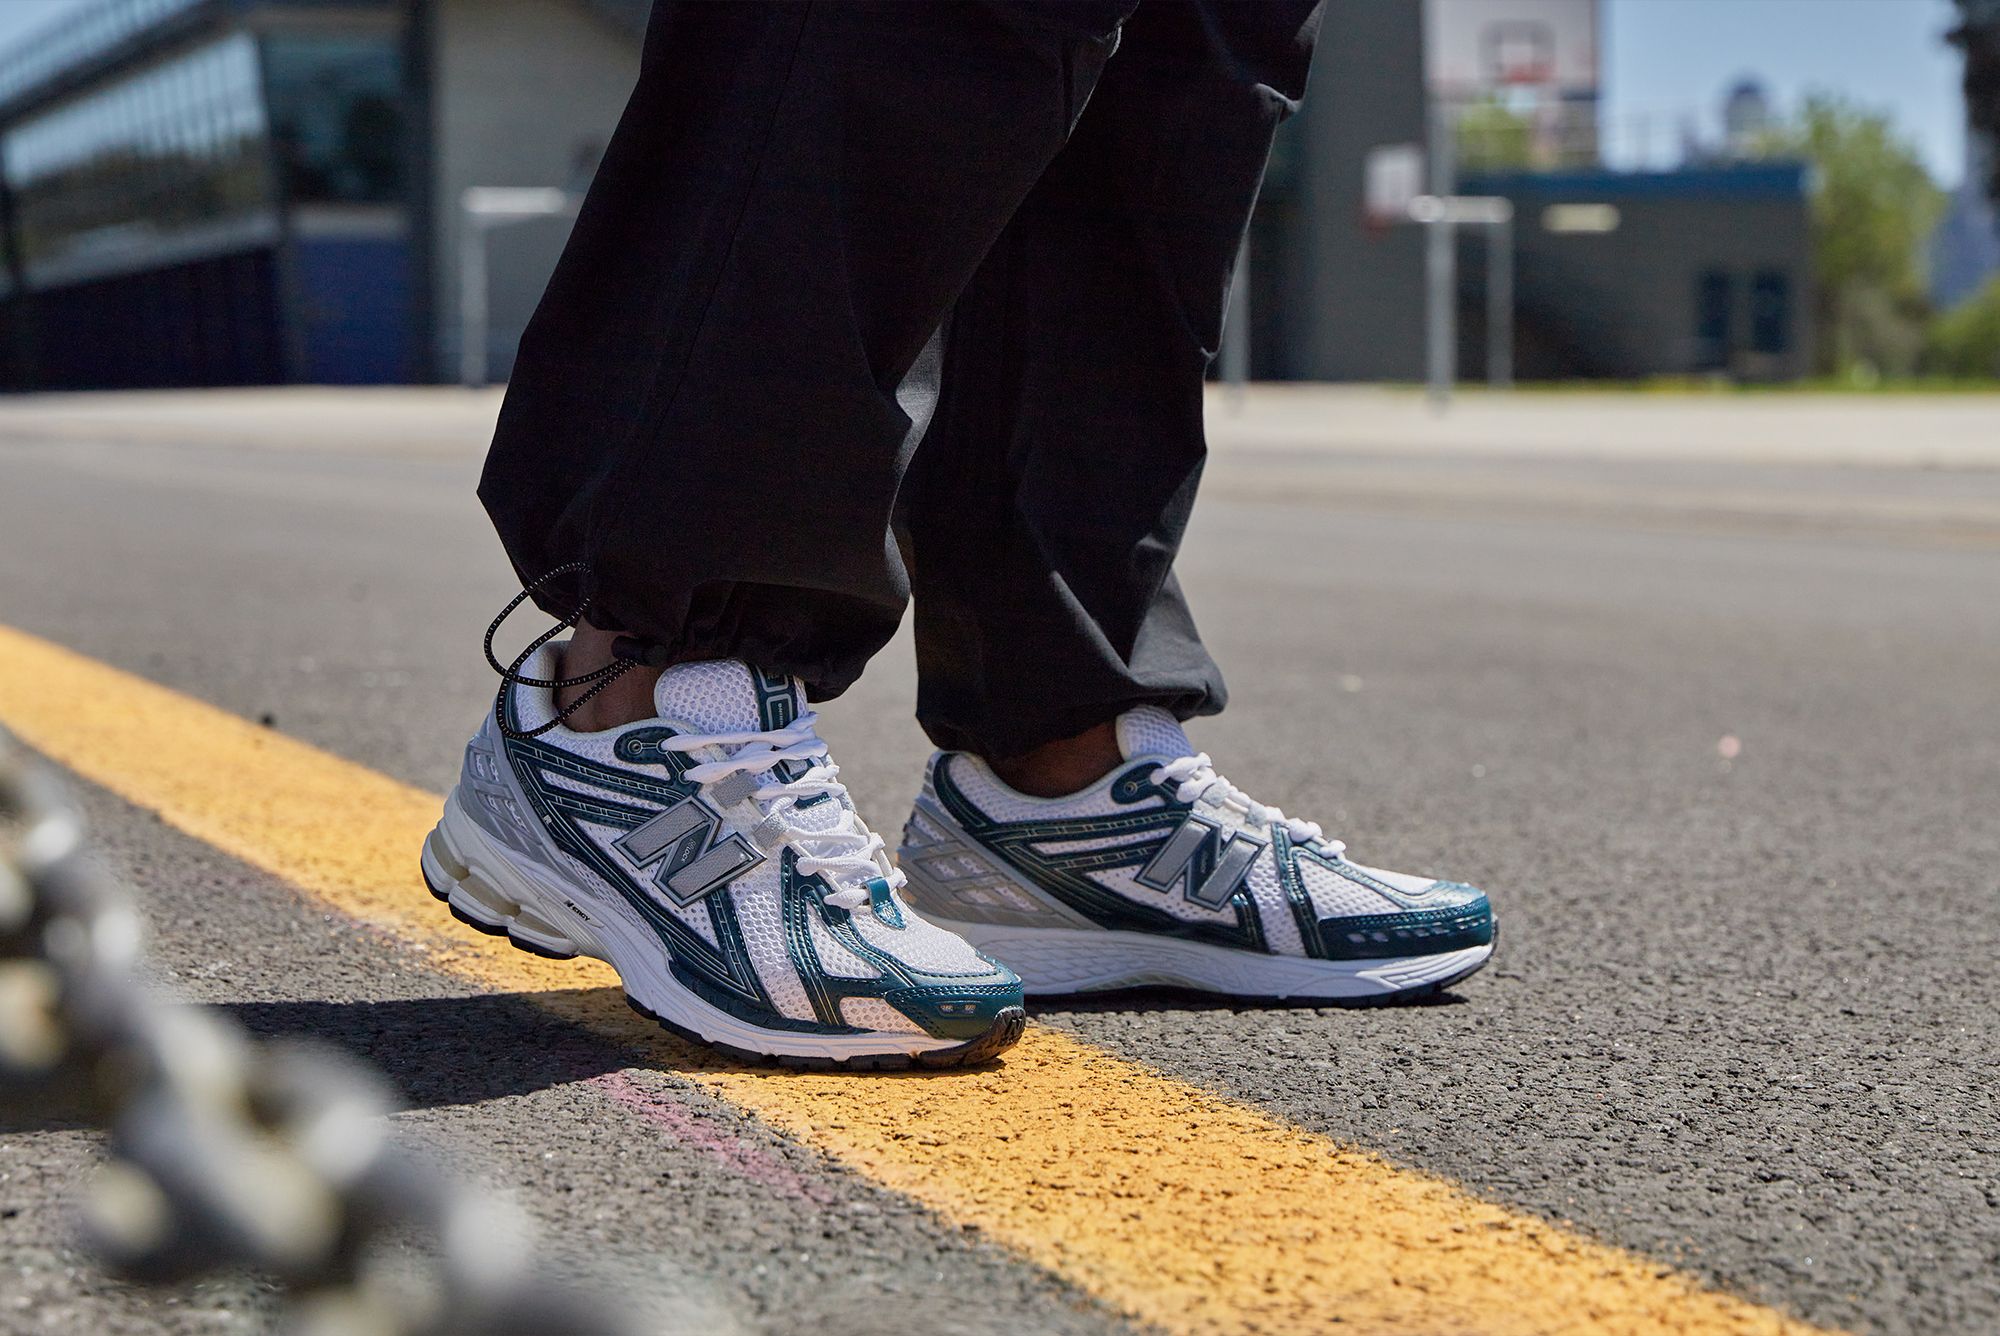 Teal Accents the Foot Locker-Exclusive New Balance Women's Collection ...